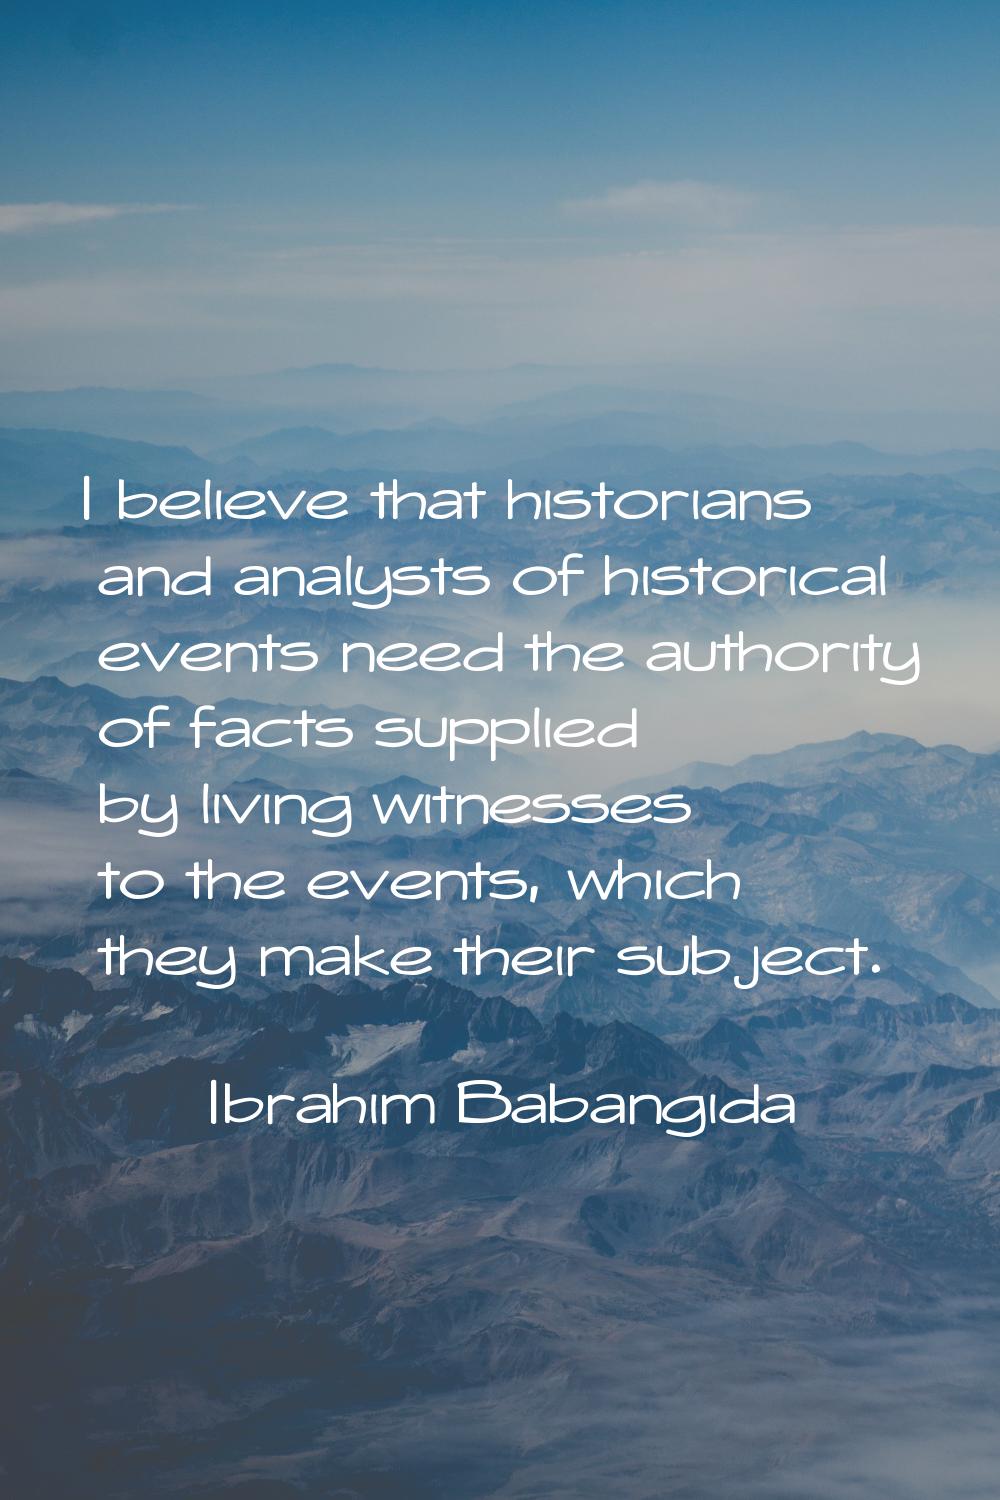 I believe that historians and analysts of historical events need the authority of facts supplied by